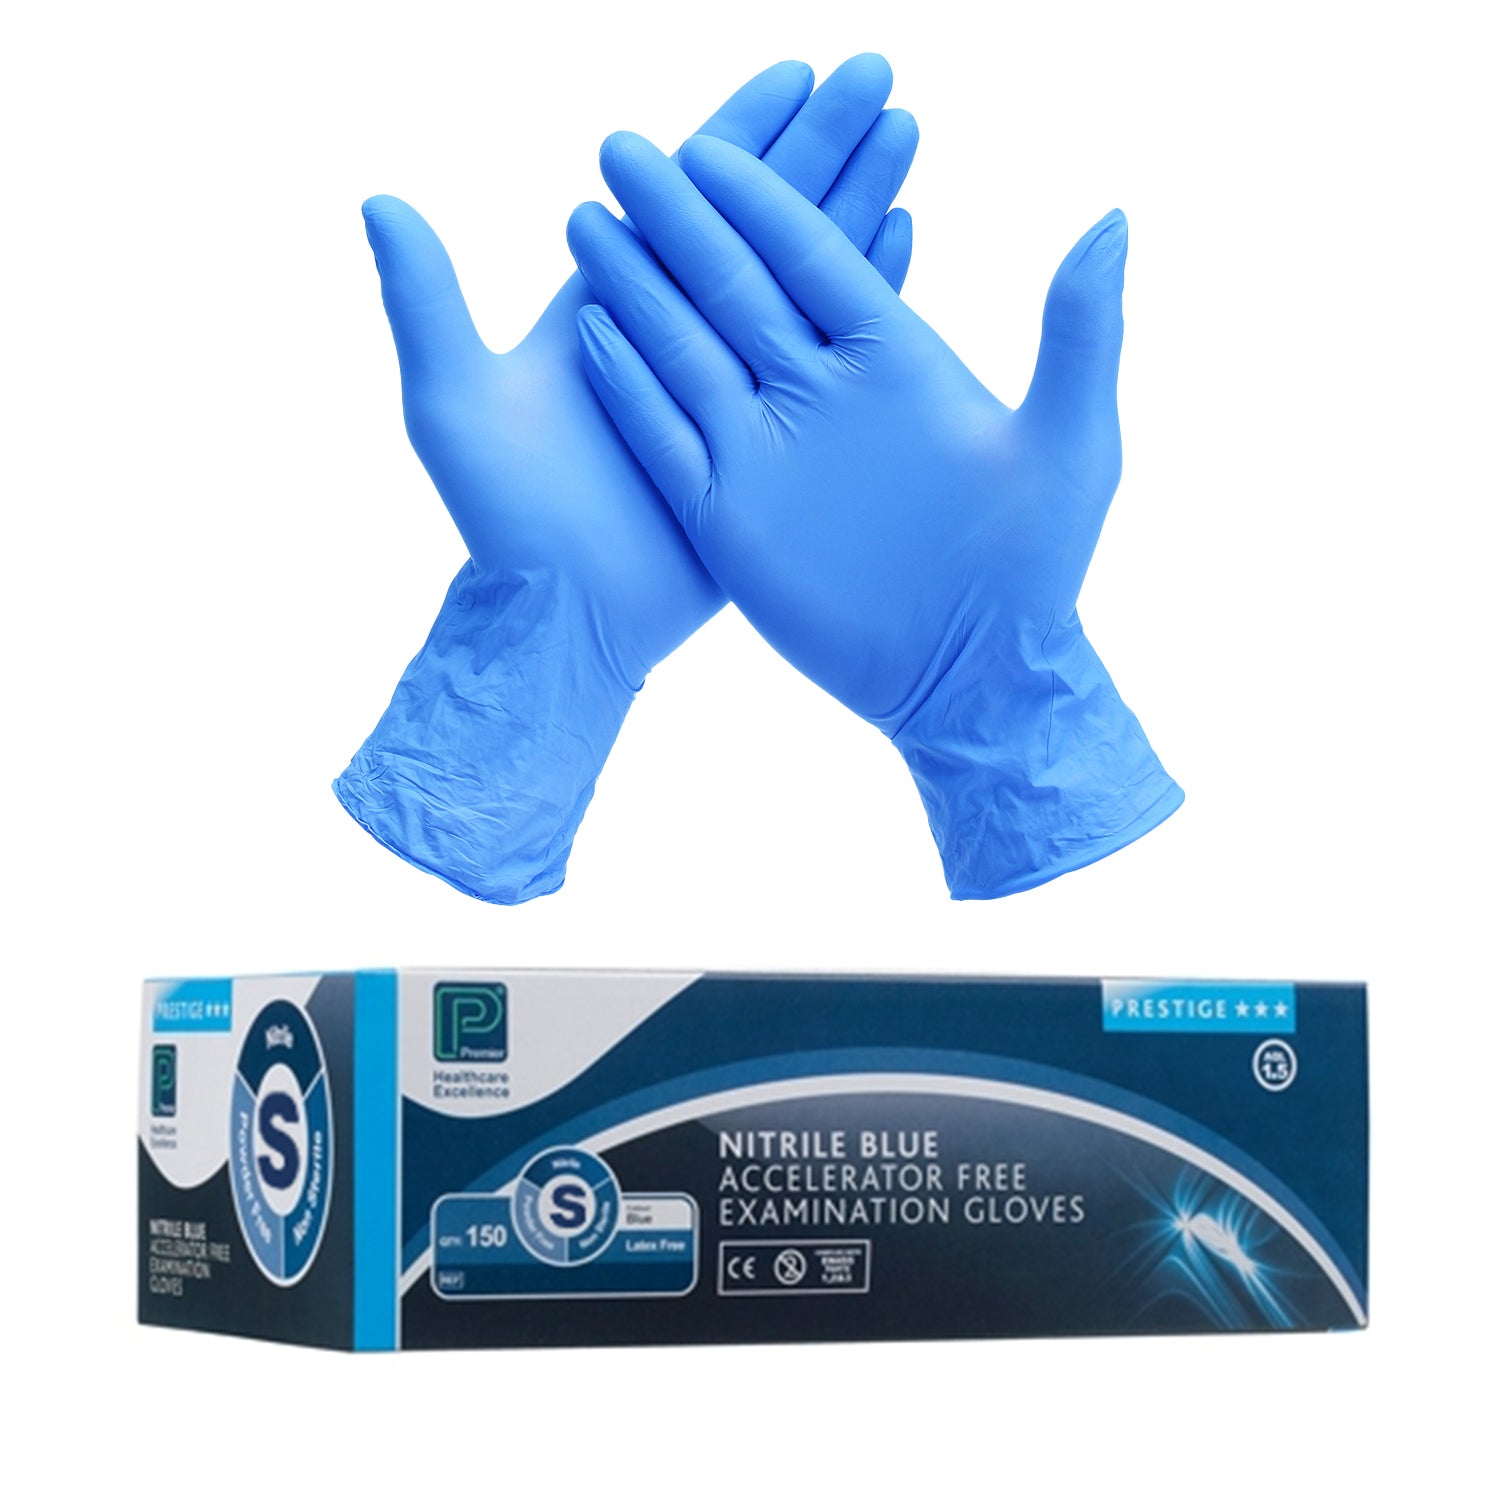 Premier AF Nitrile Examination Gloves | Sterile | Latex Free | Small | Pack of 50 Pairs (5)